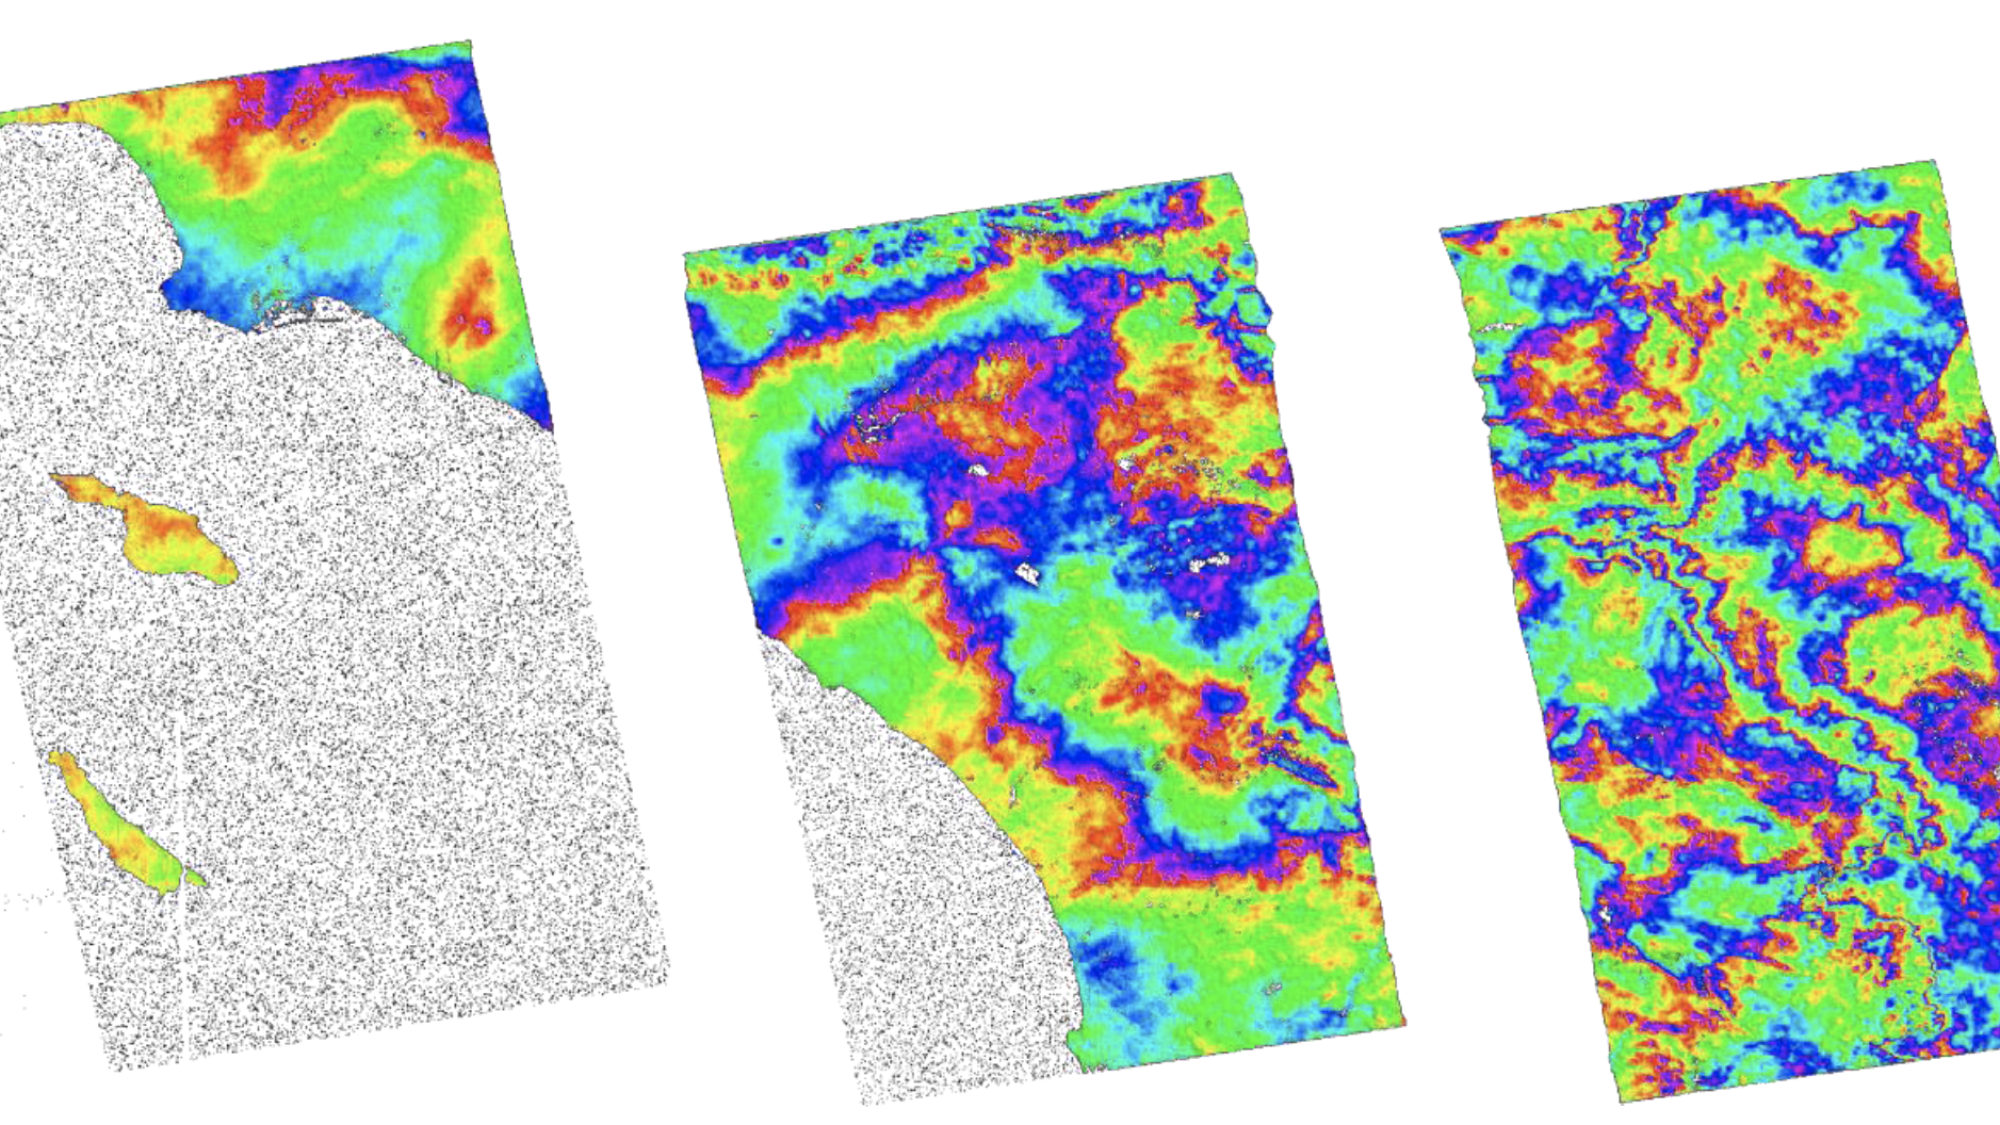 Script output images: color phase products for each swath F1, F2, F3. Contains modified Copernicus Sentinel data (2015) processed by ESA.